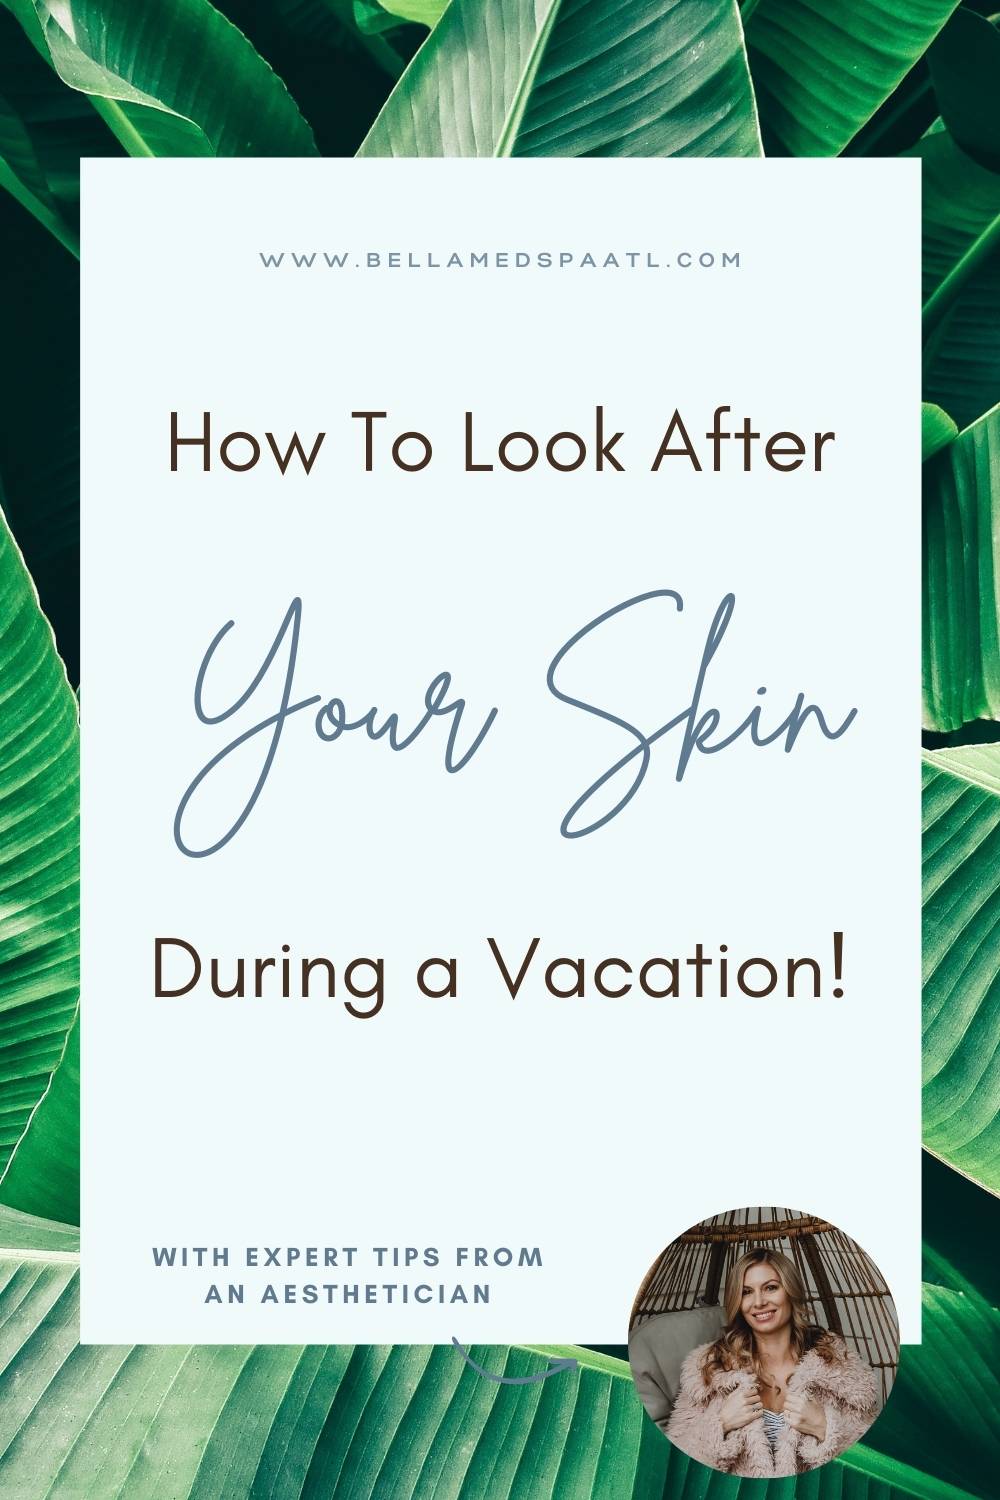 Going on vacation and wondering how to take care of your skin? The sun and change of climate can take a toll on your skin and make it look dull, so here are my top skincare tips to get that glow on your skin even when traveling!